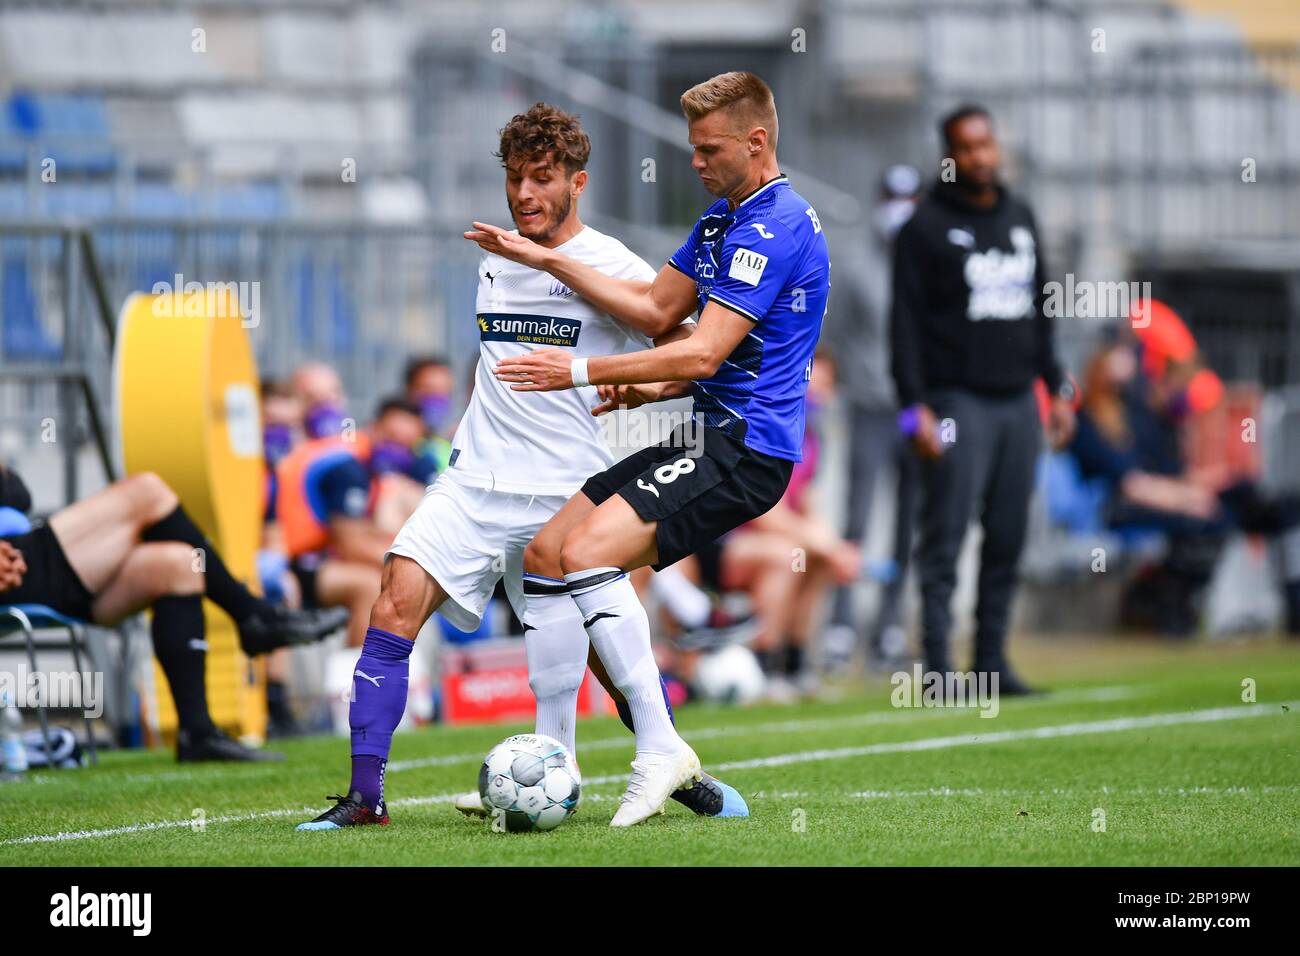 Westphalia, Germany. 17th May, 2020. FILED - 17 May 2020, North Rhine-Westphalia, Bielefeld: Football, 2nd Bundesliga, DSC Arminia Bielefeld - VfL Osnabrück, 26th matchday, Schüco-Arena: Florian Hartherz (r) from Bielefeld and Bashkim Ajdini from Osnabrück in action. After a 65-day Corona break, the ball is rolling again in the Bundesliga. The matches take place without spectators. Photo: Stuart Franklin/Getty/POOL/dpa - IMPORTANT NOTE: In accordance with the regulations of the DFL Deutsche Fußball Liga and the DFB Deutscher Fußball-Bund, it is prohibited to exploit or have exploited in the st Stock Photo